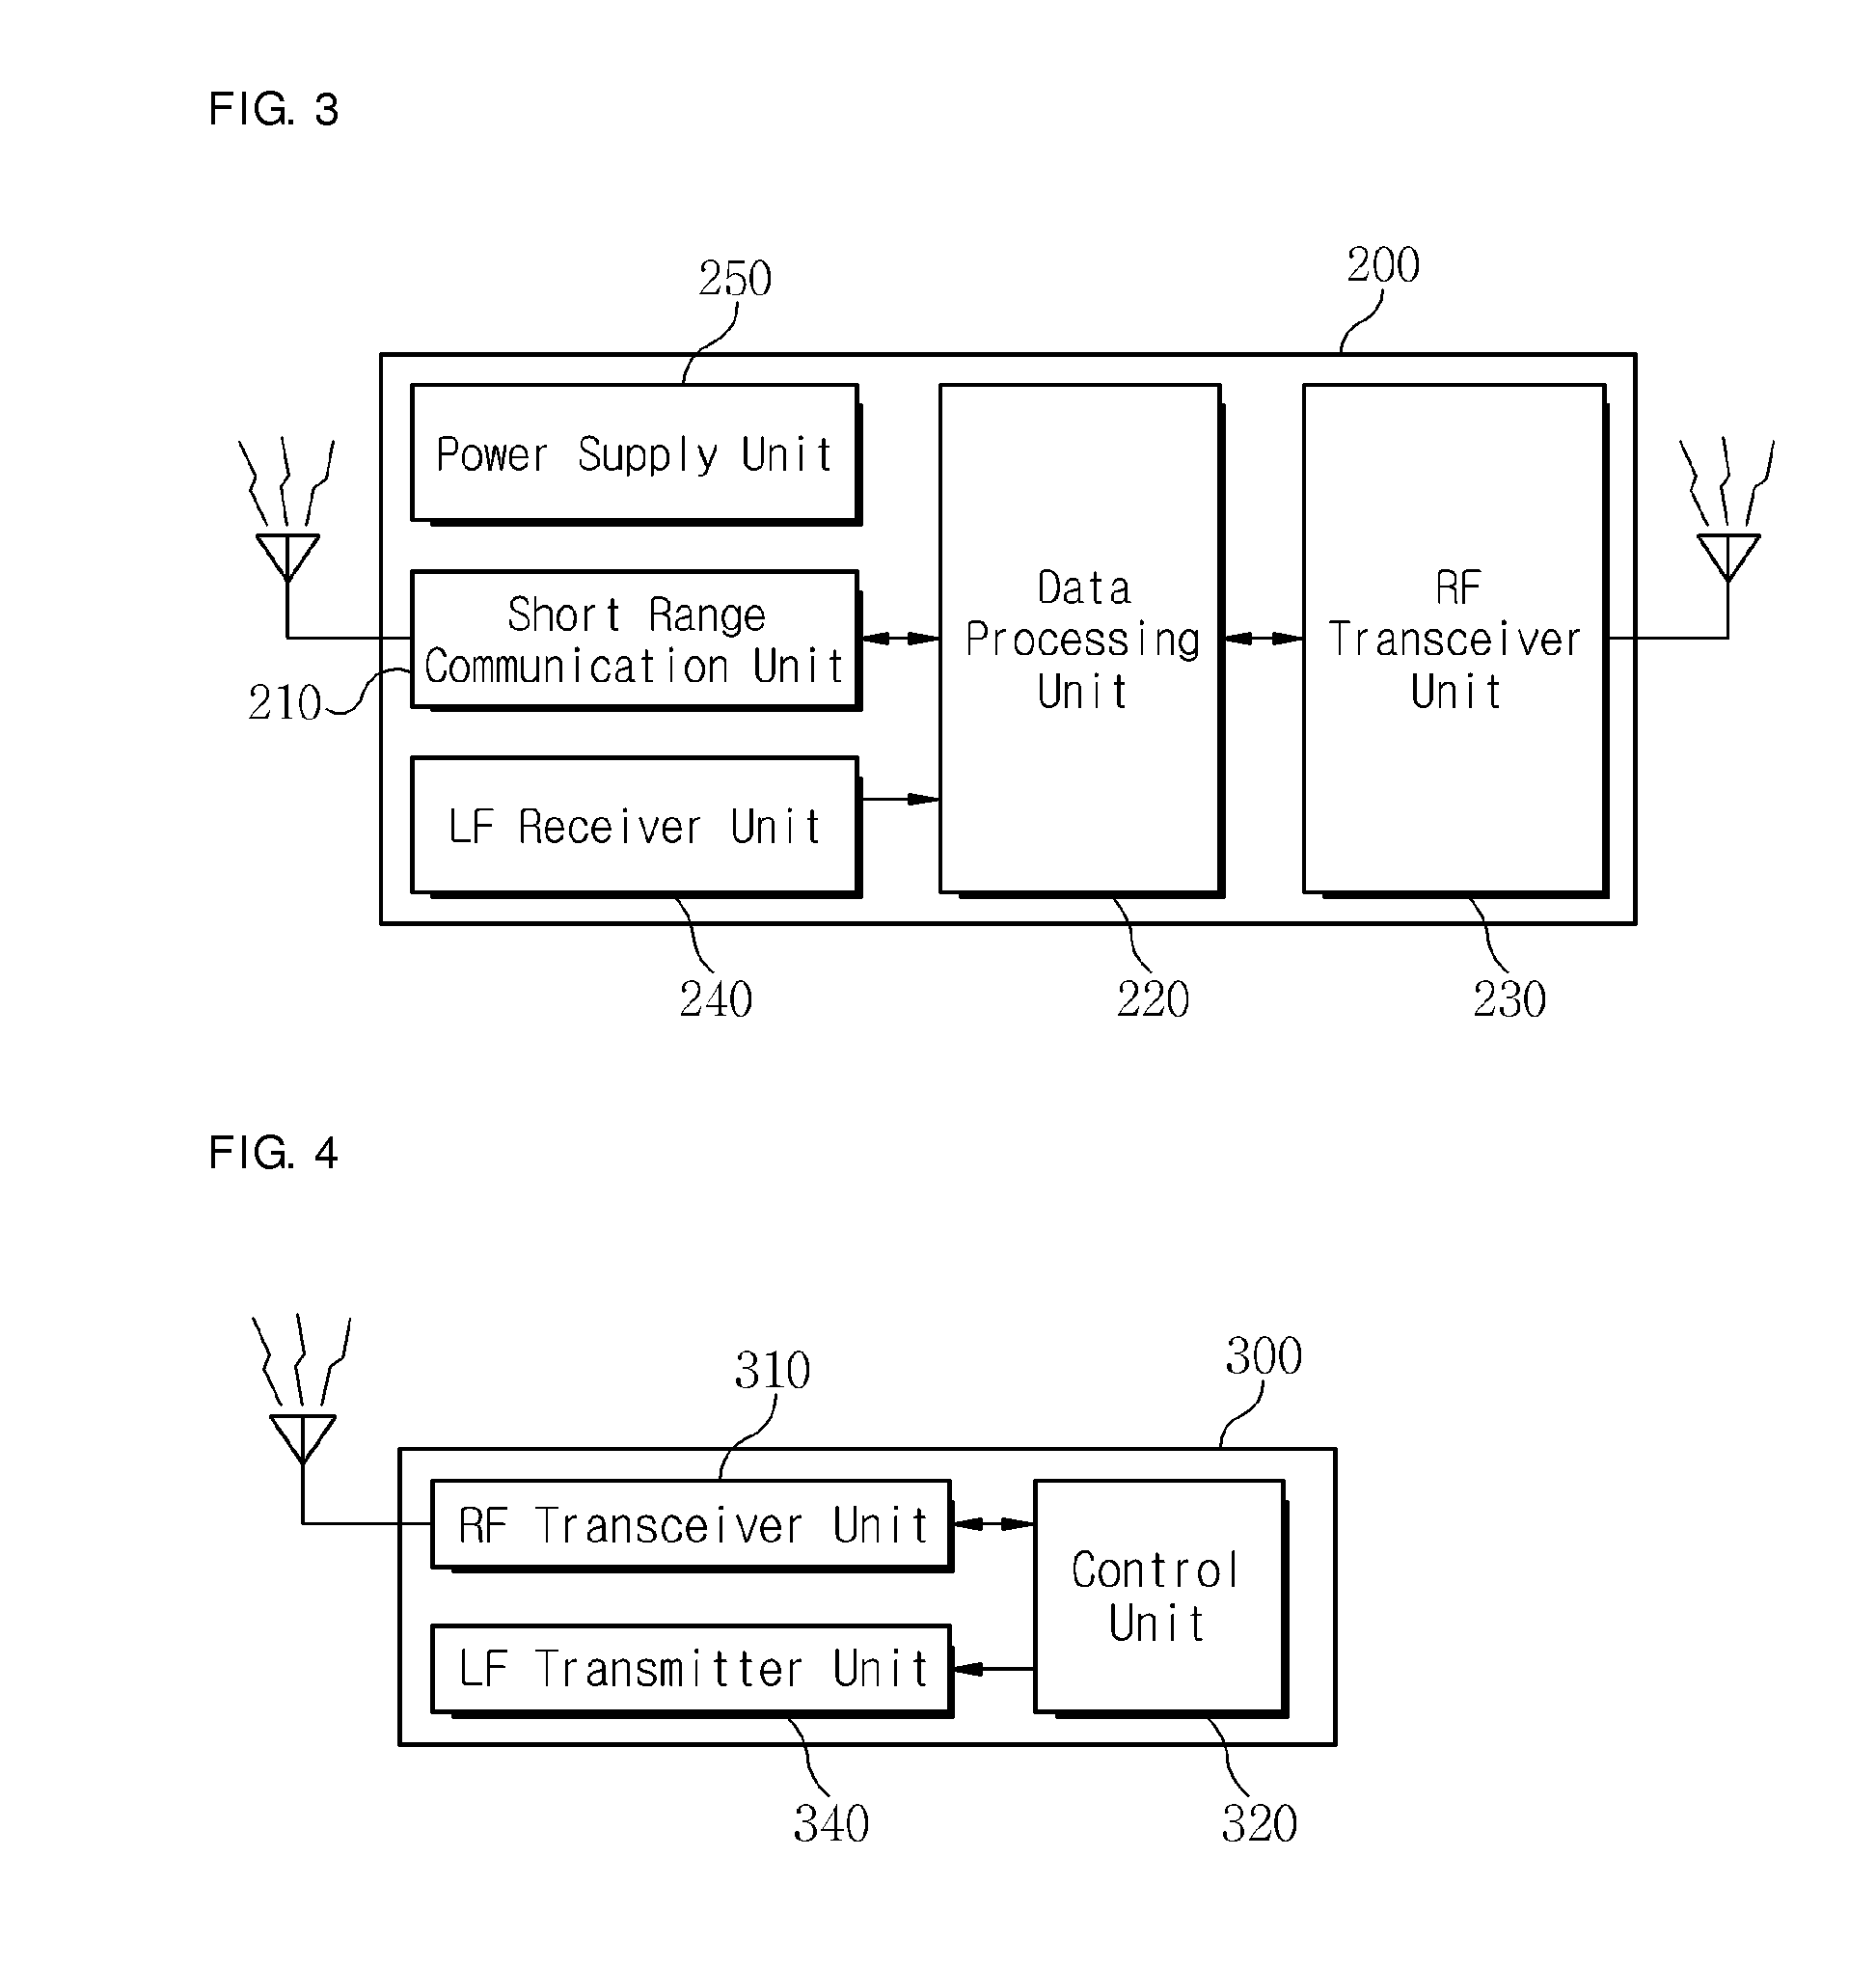 Bidirectional remote control system and method using mobile interface device